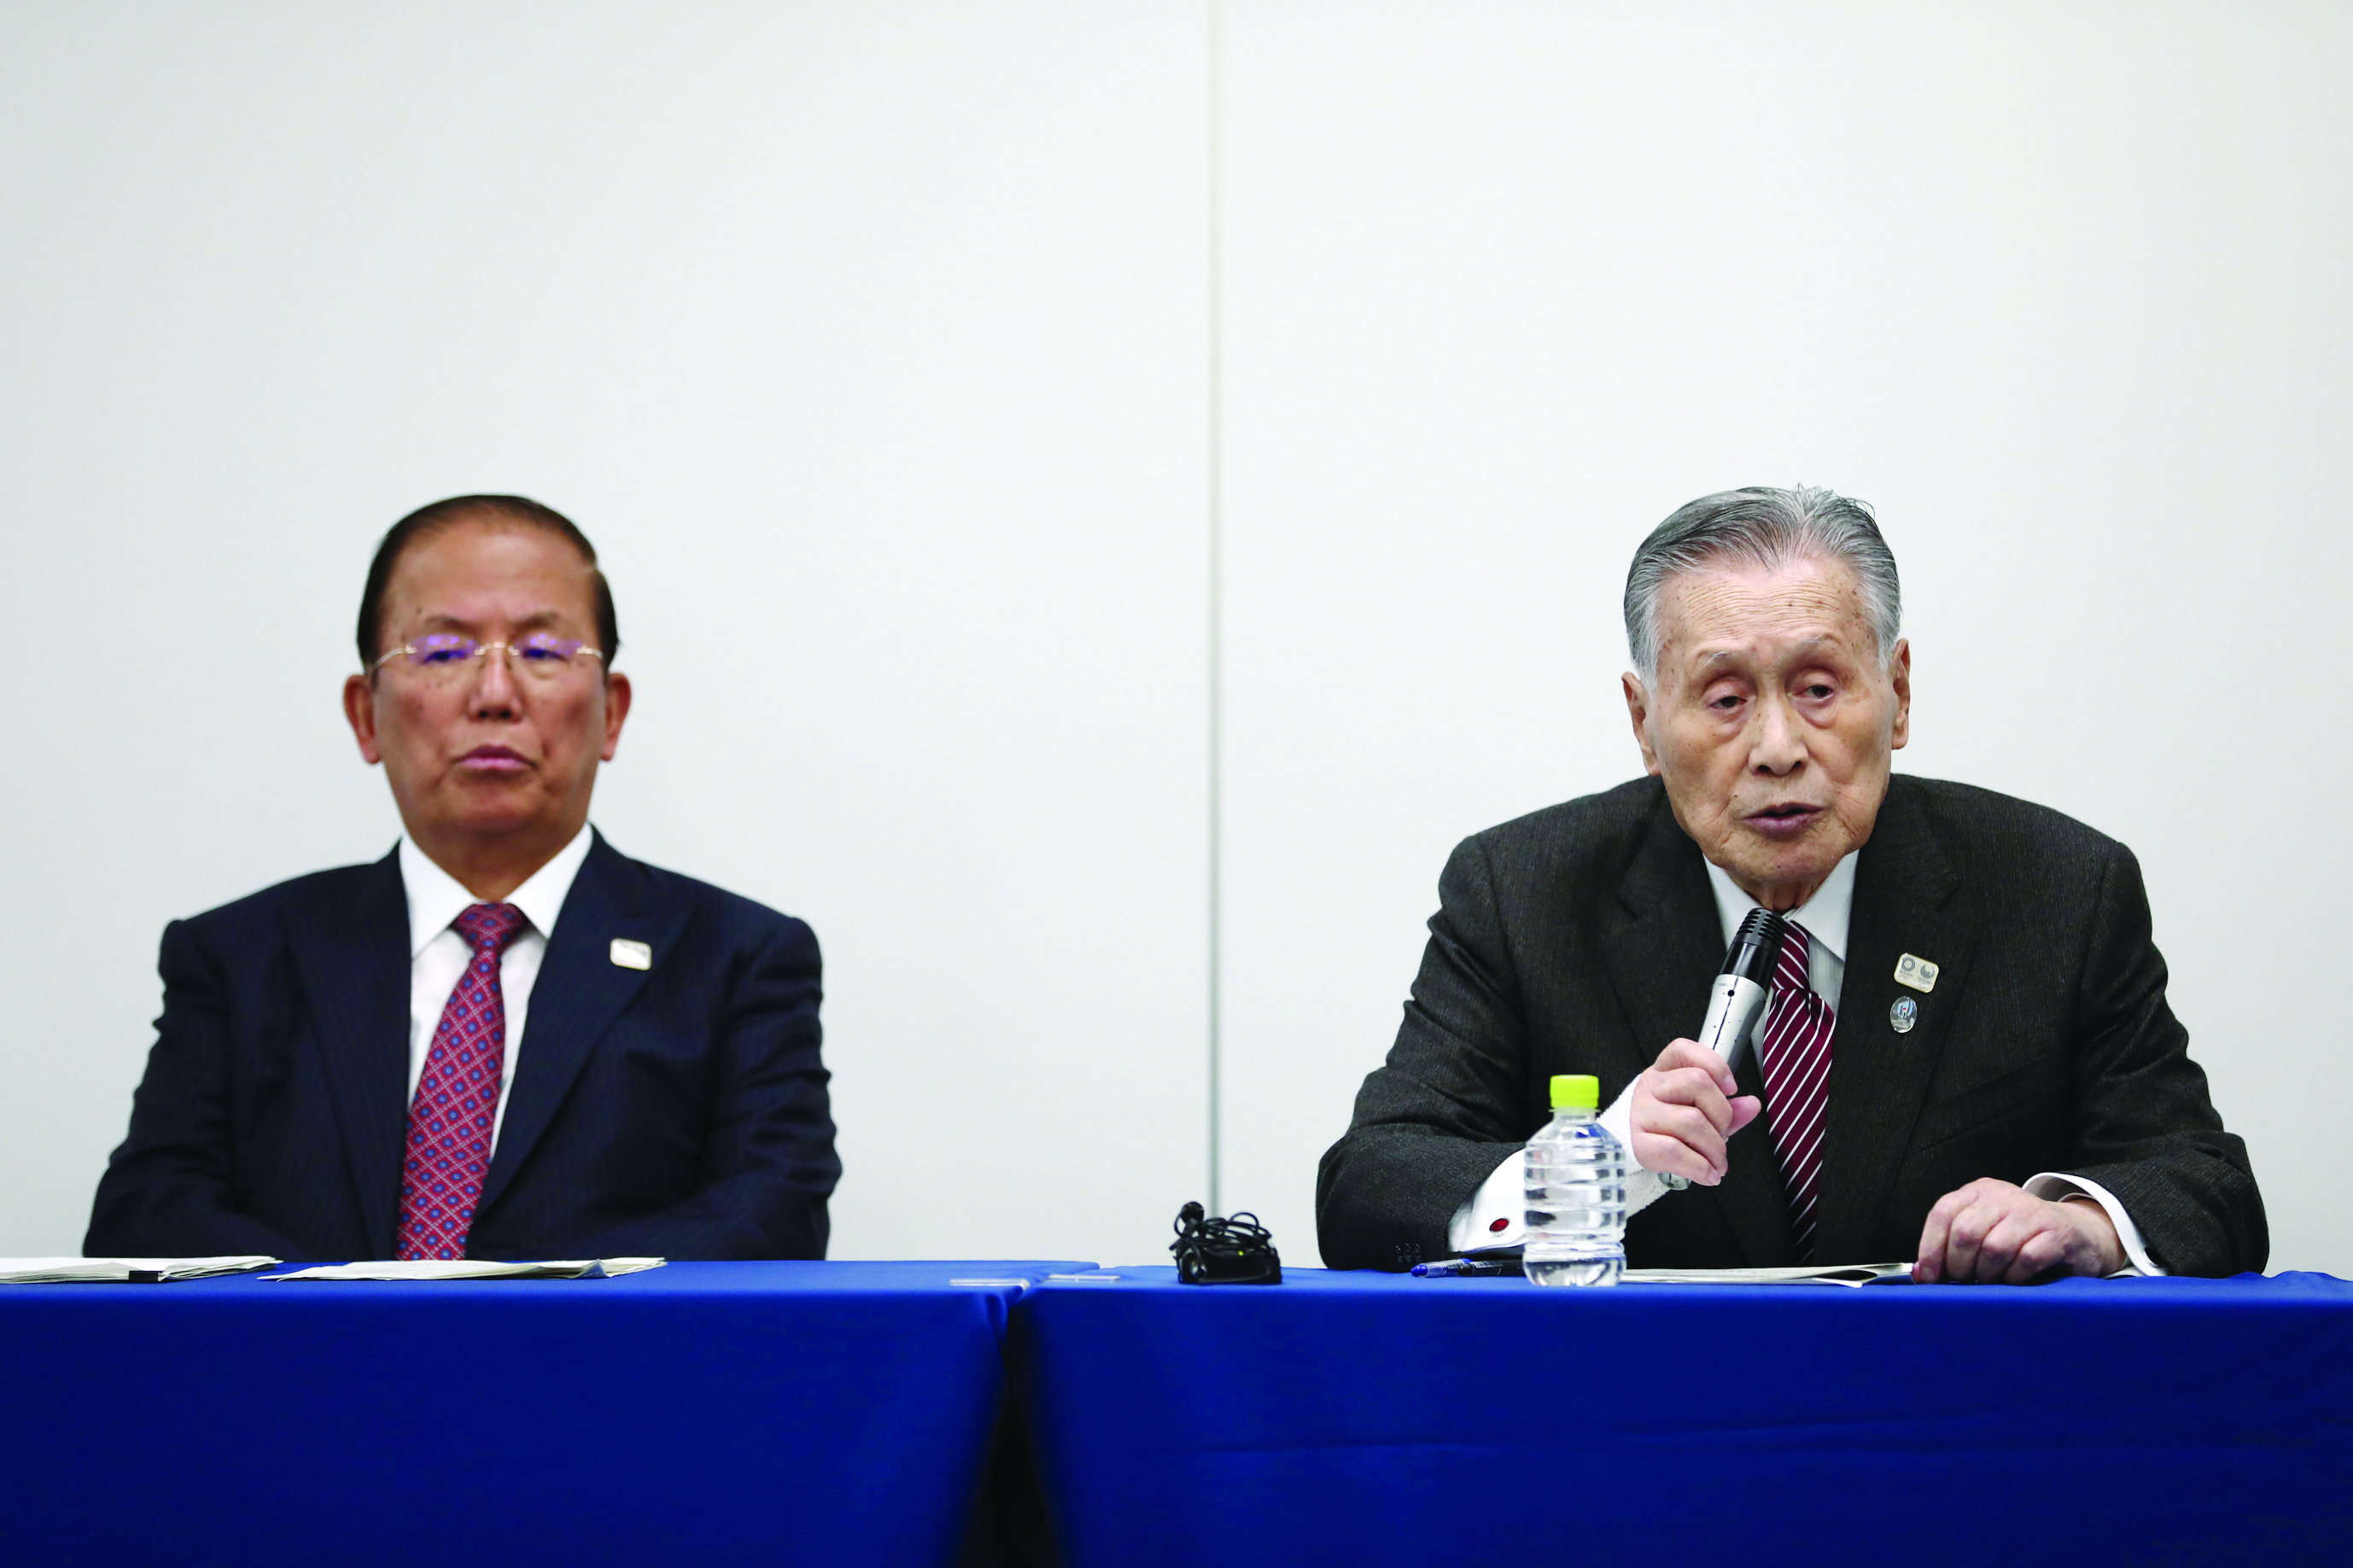 Chief executive officer of the Tokyo 2020 Olympics, Toshiro Muto (L), and Tokyo 2020 president Yoshiro Mori (R) attend a press conference in Tokyo on March 23, 2020. (Photo by Behrouz MEHRI / AFP)